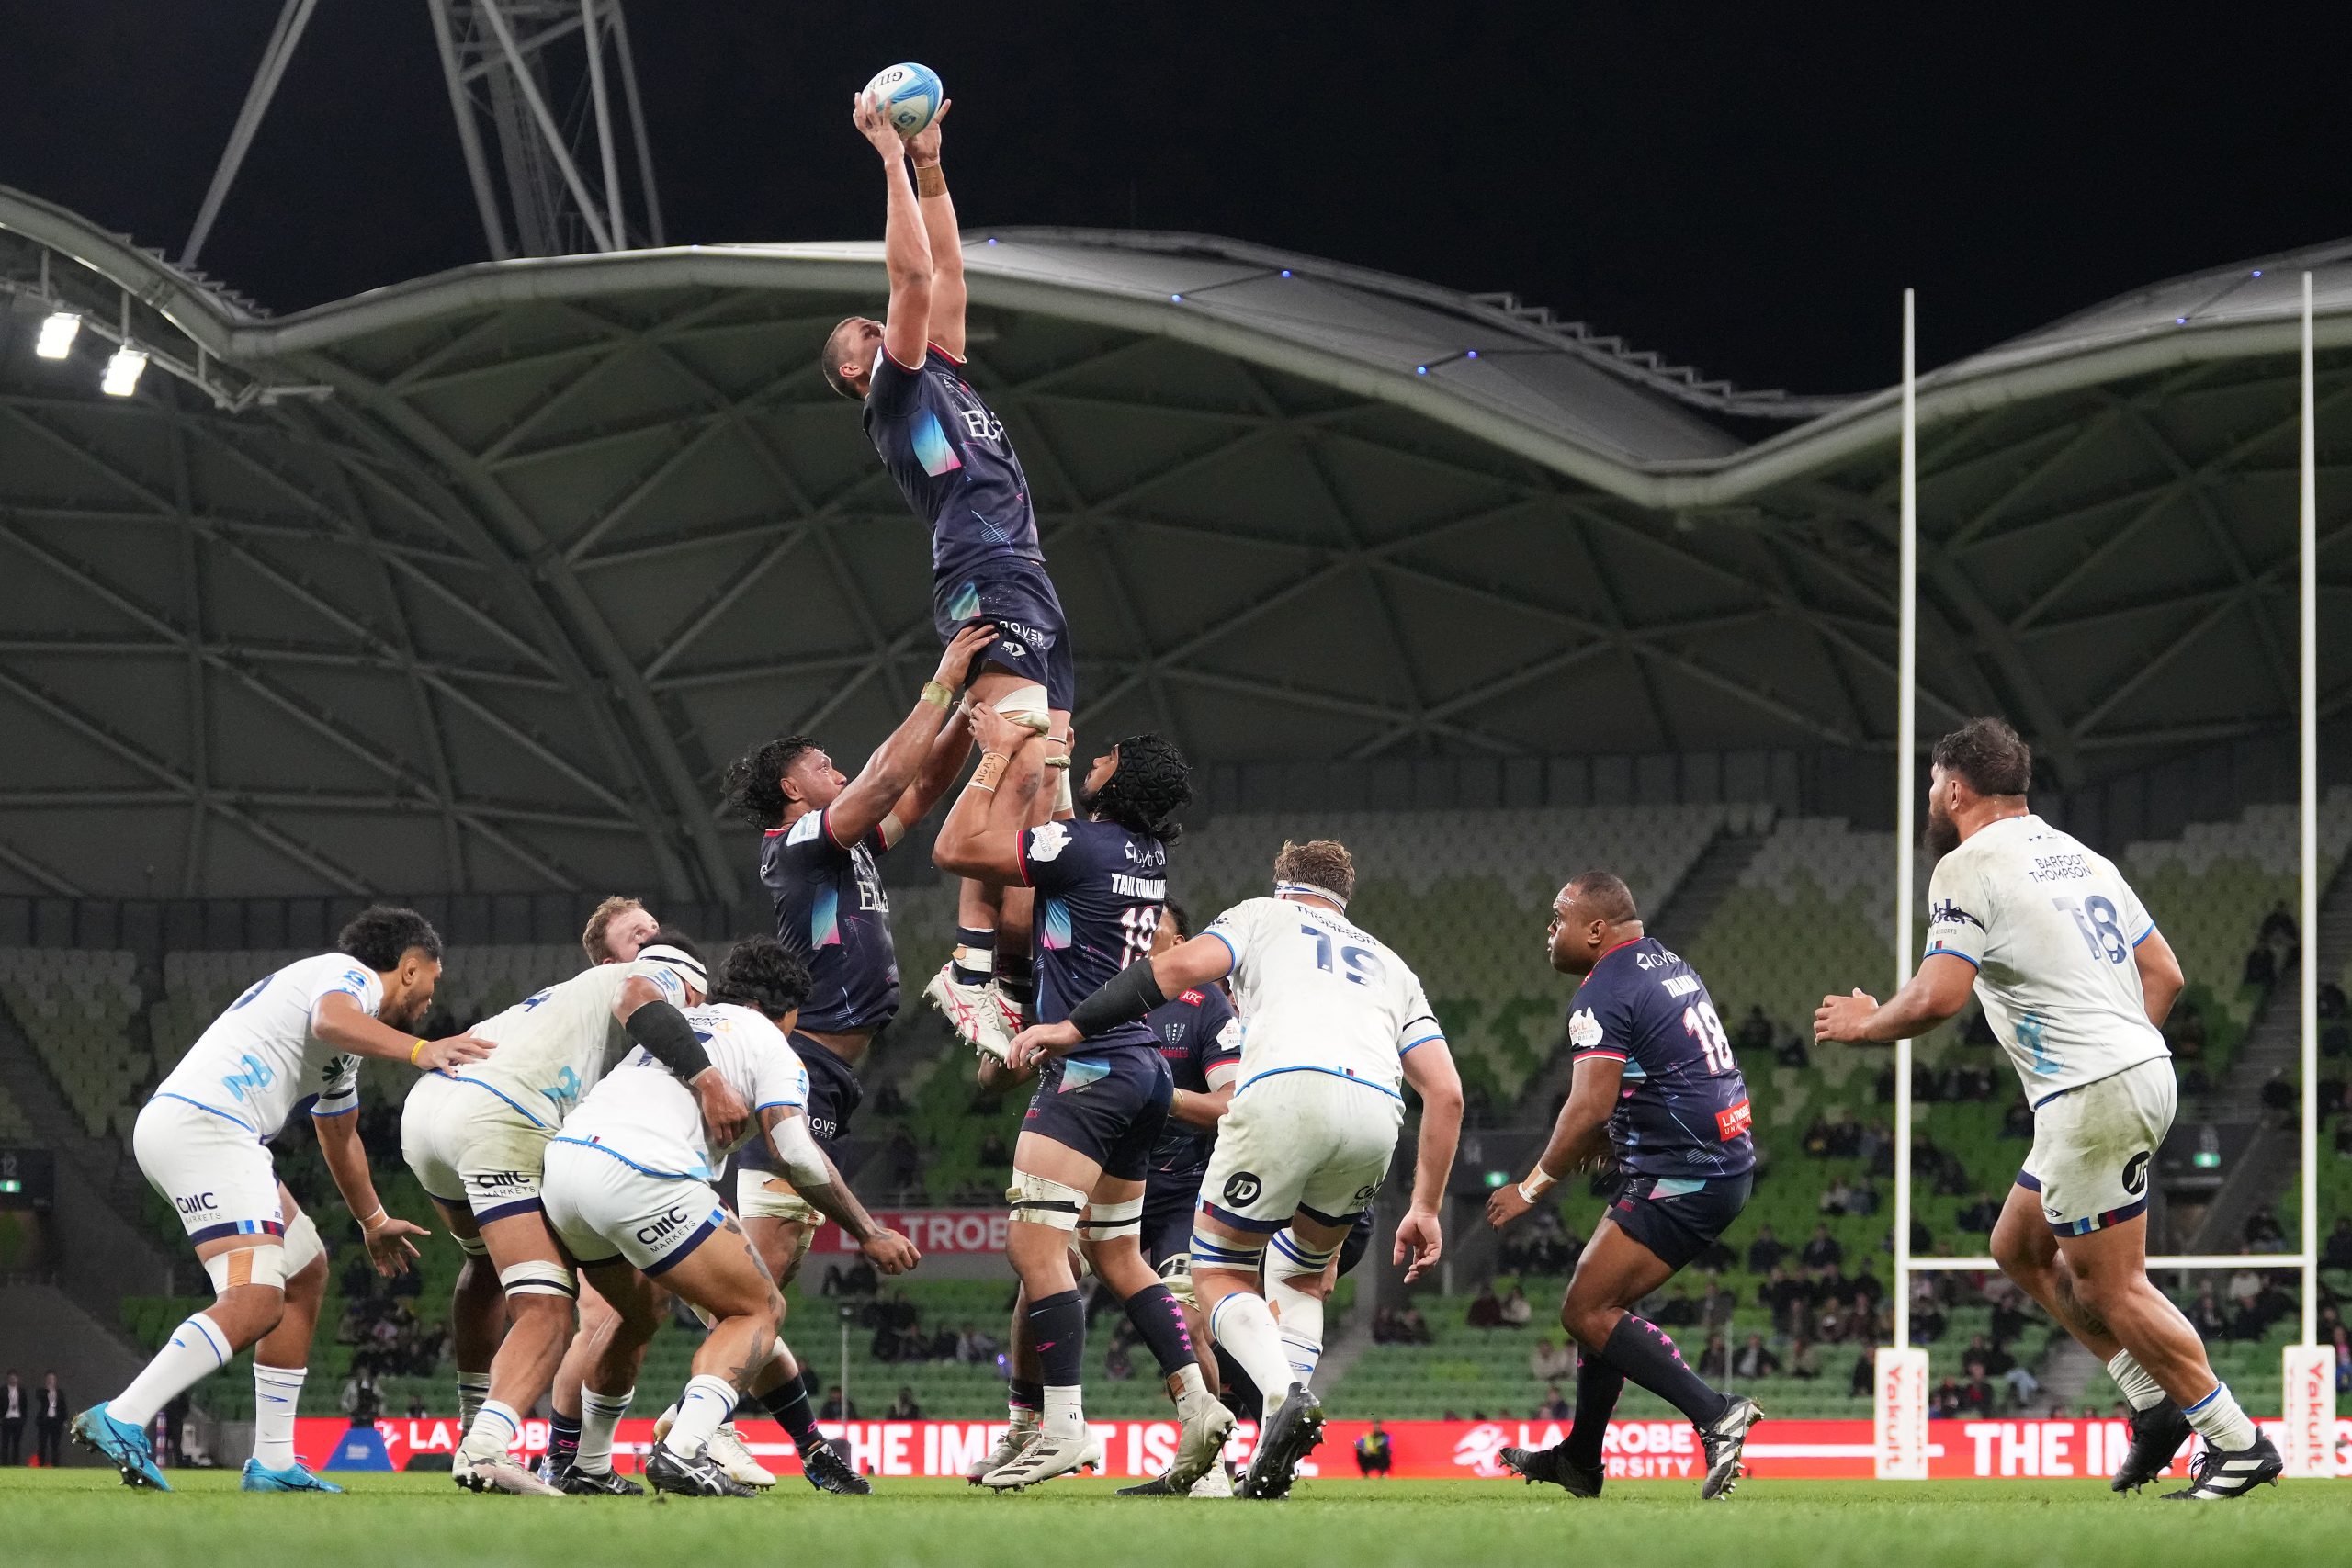 Josh Canham of the Rebels wins the line out during the round 11 Super Rugby Pacific match against the Blues.